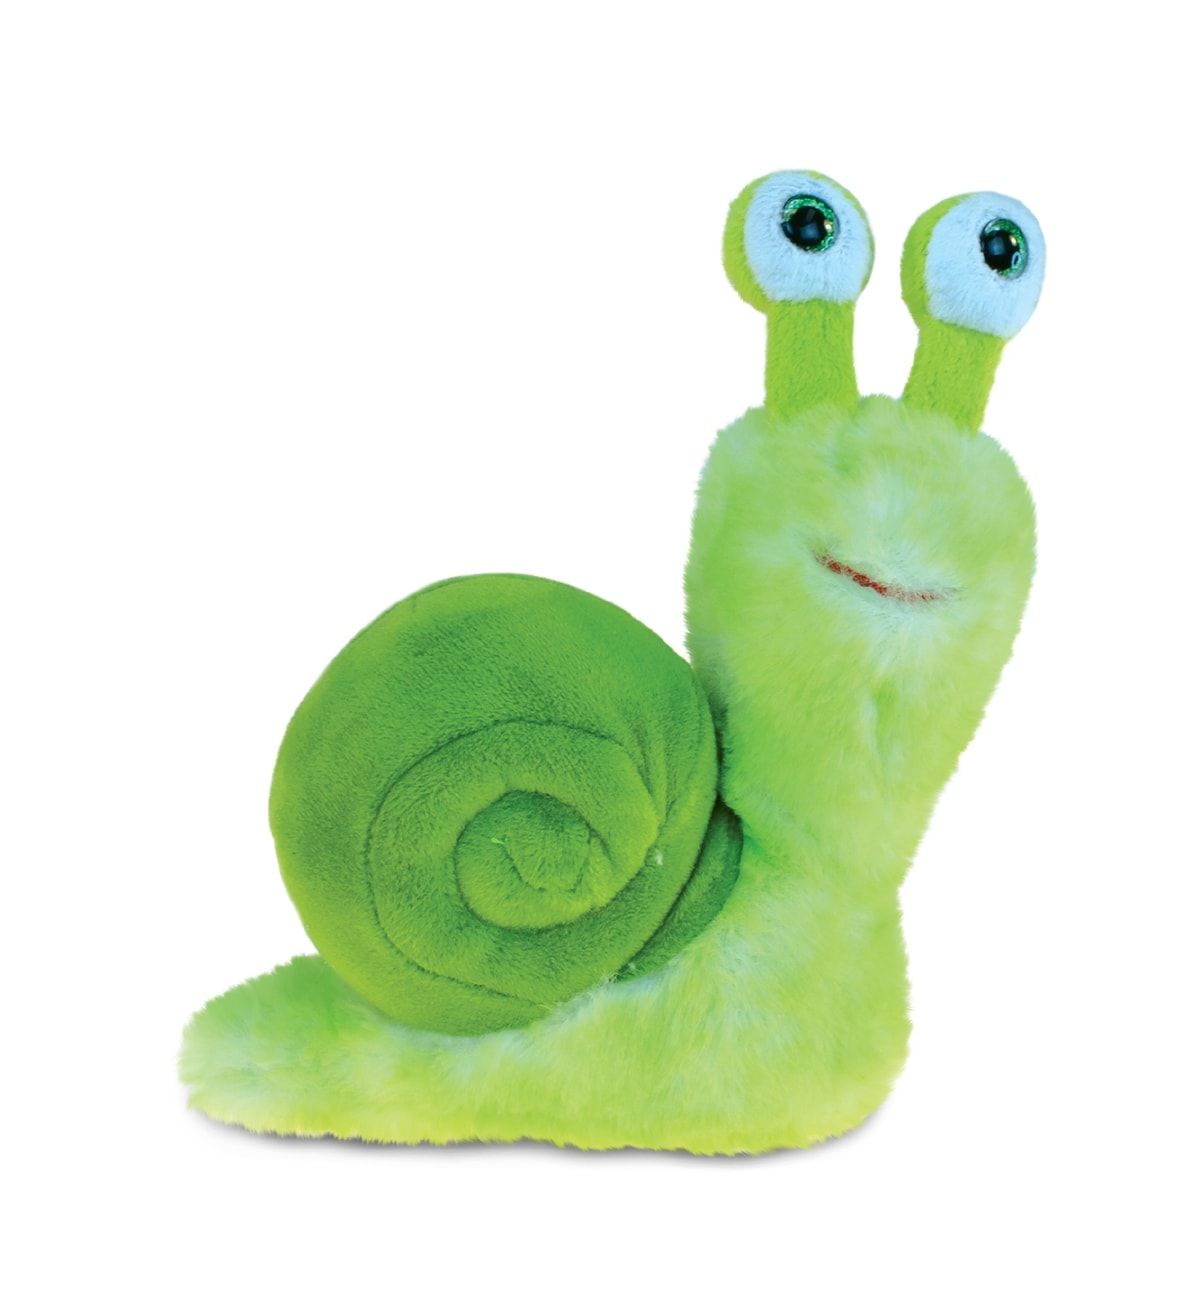 Details about   Simulation Green Snail Plush Toy Doll Home Decoration Gift for Children 